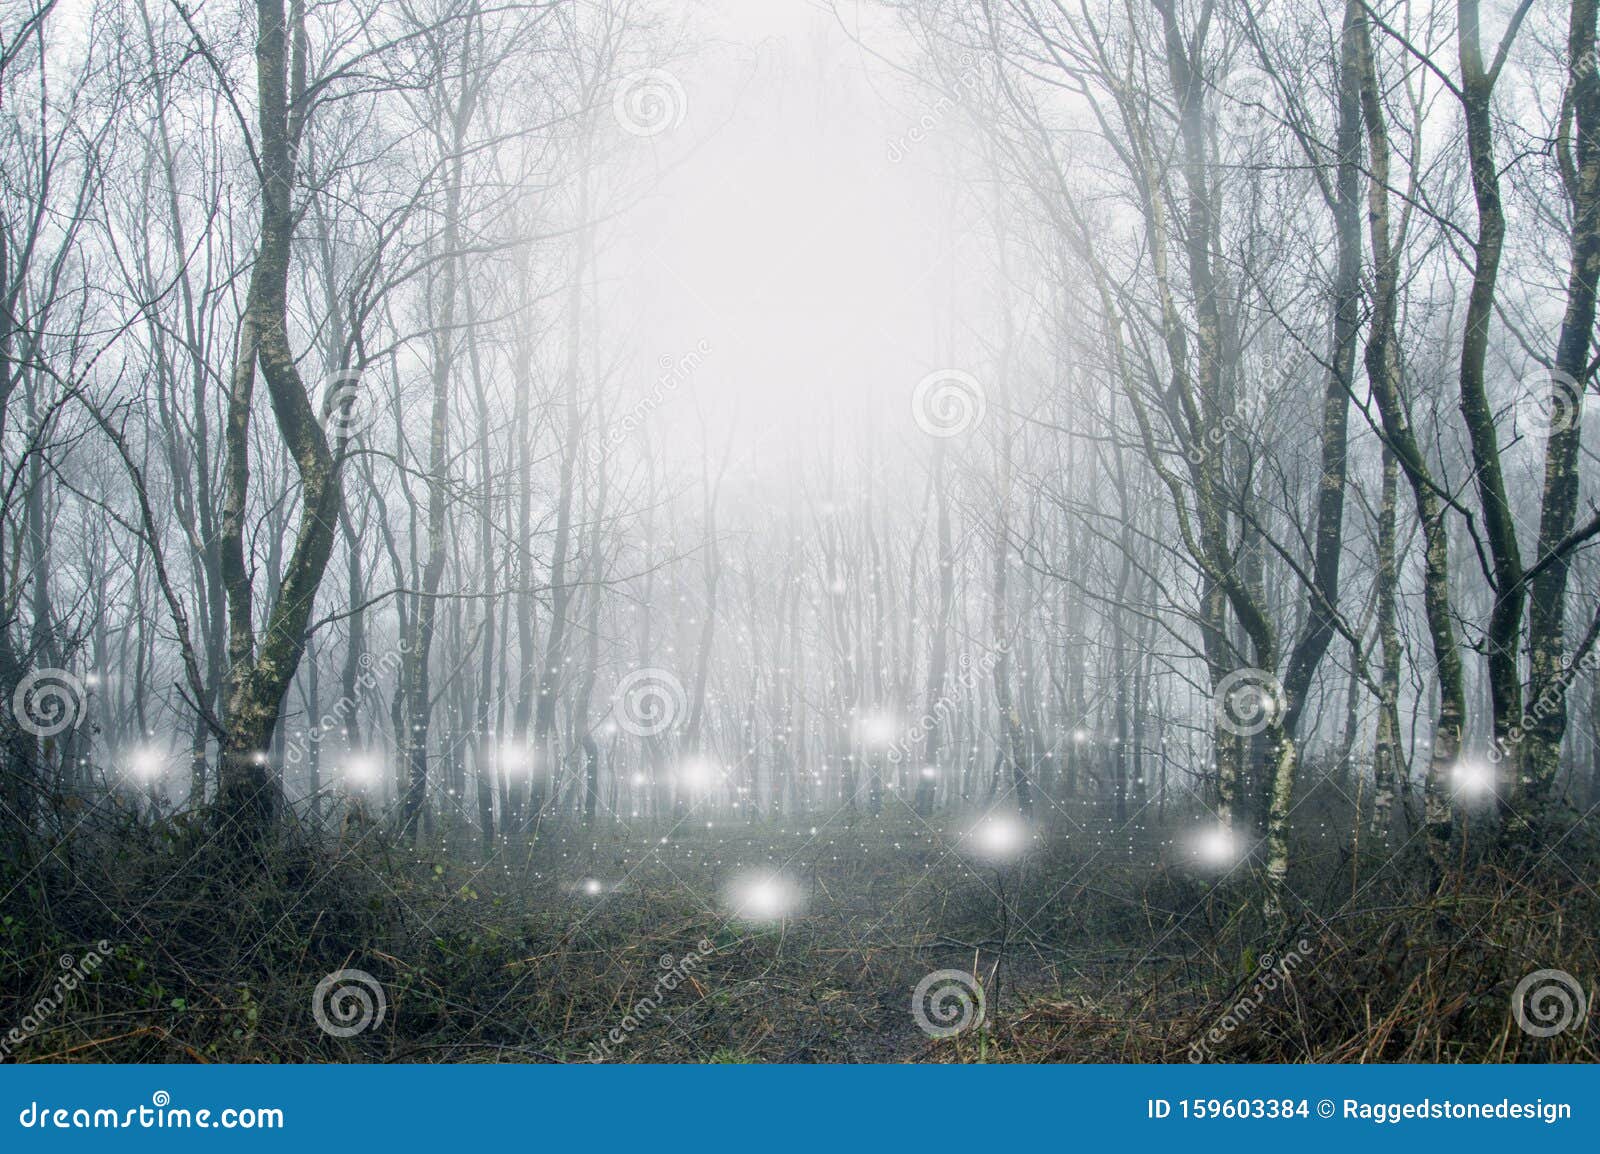 glowing spooky, supernatural white lights and orbs floating in a forest on a moody, misty winters day